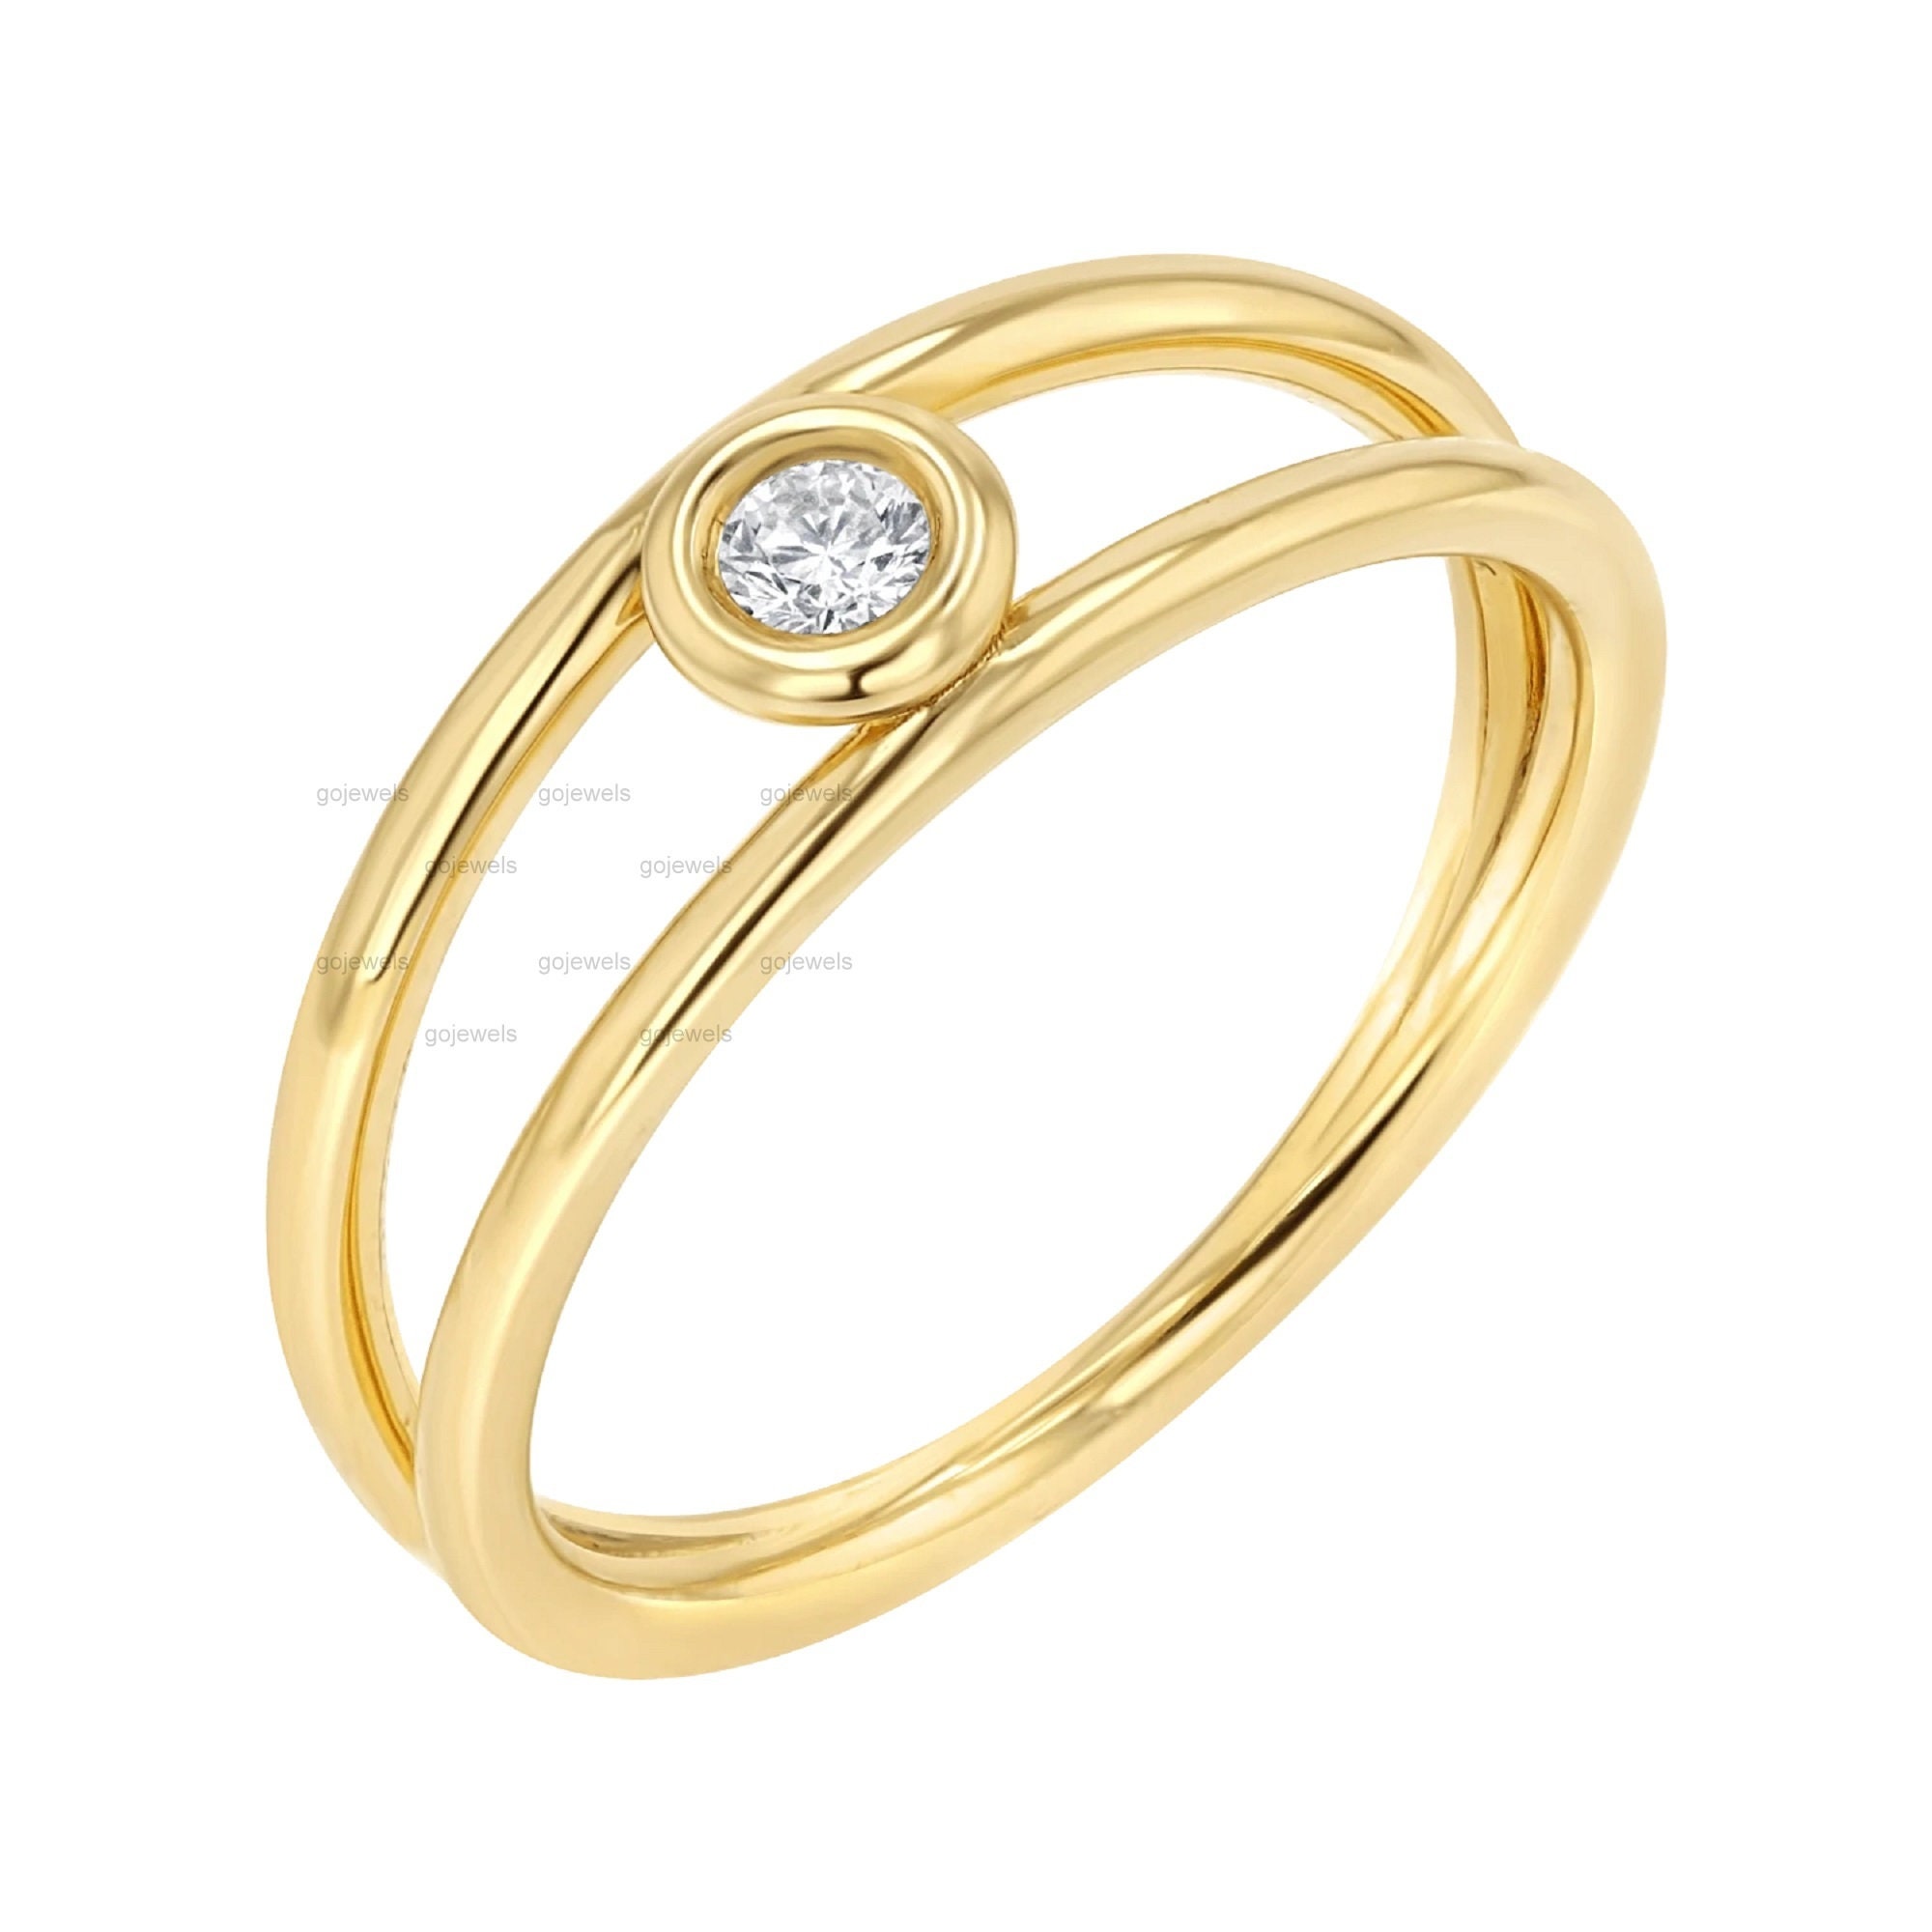 Amazon.com: espere 14K Yellow Gold Moissanite Engagement Ring for Women |  Solid Gold Three-Stone Promise Ring | 0.2 Carat Moissanite Dainty Stacking  Rings (3.5) : Clothing, Shoes & Jewelry